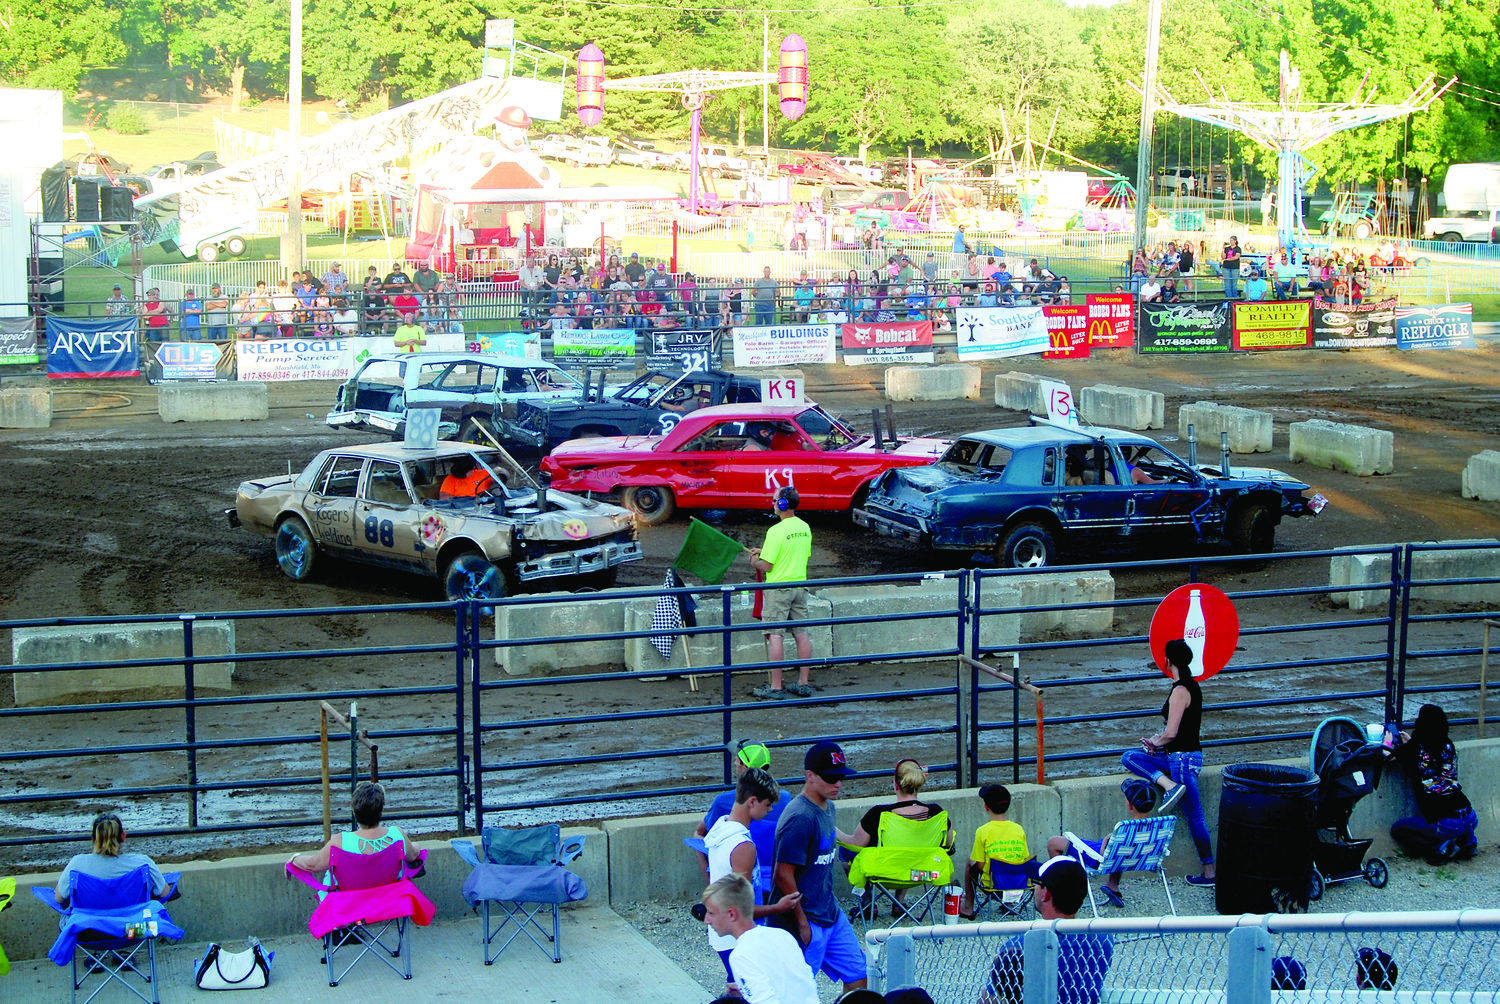 No sandbags here! Hillbilly Derby is looking for their next “Mad Dog” on July 2. Could it be you?